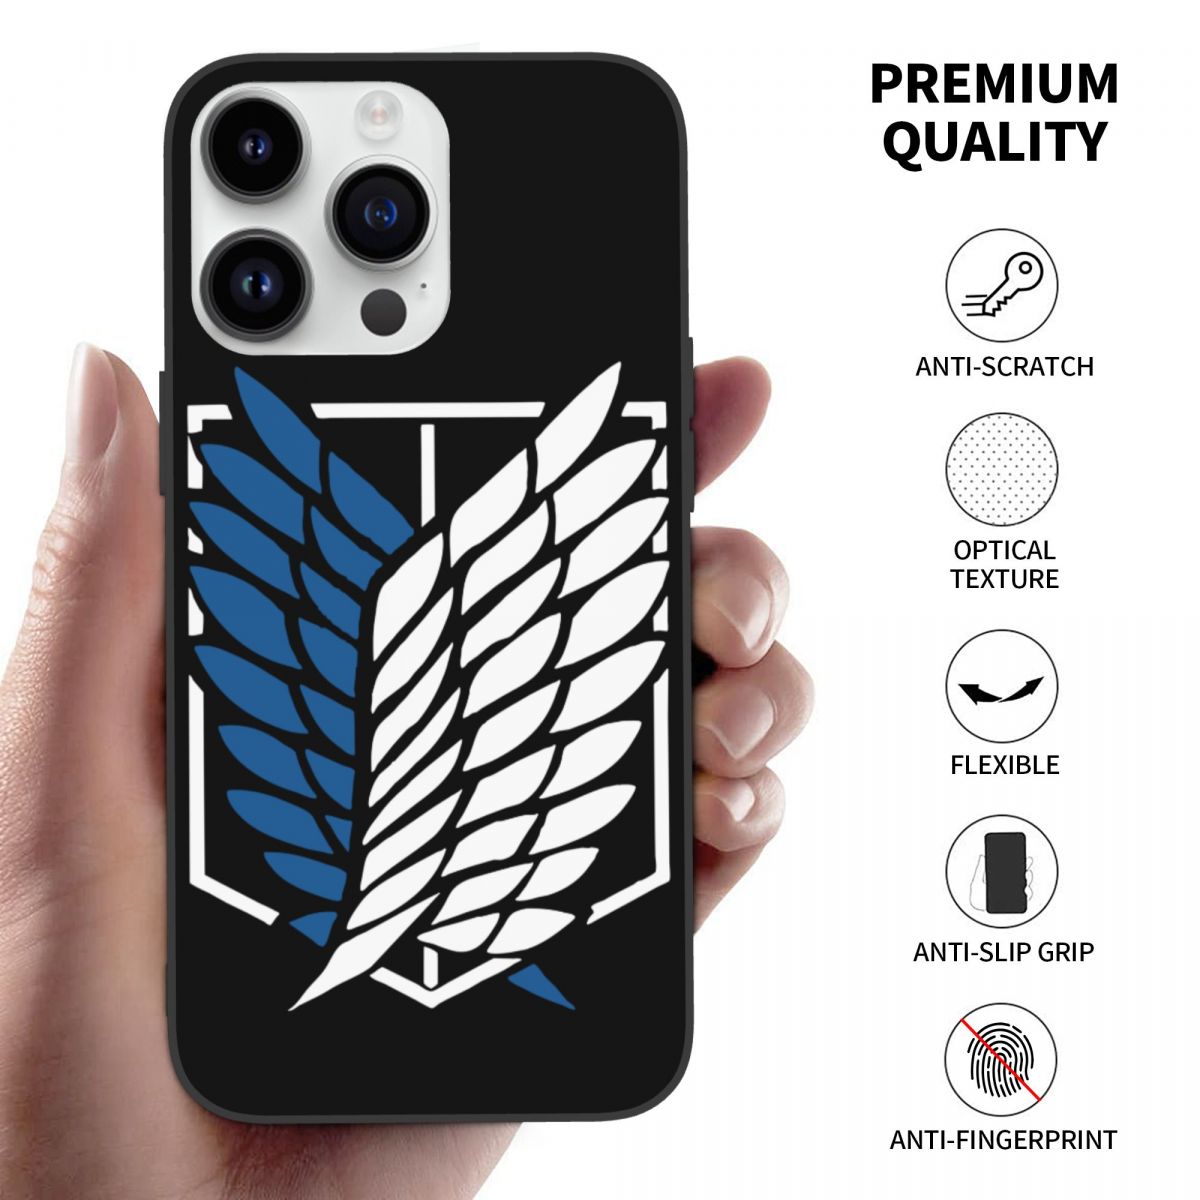 Ensure your devices are protected at all times| If you are looking for more Attack On Titan Merch, We have it all! | Check out all our Anime Merch now!